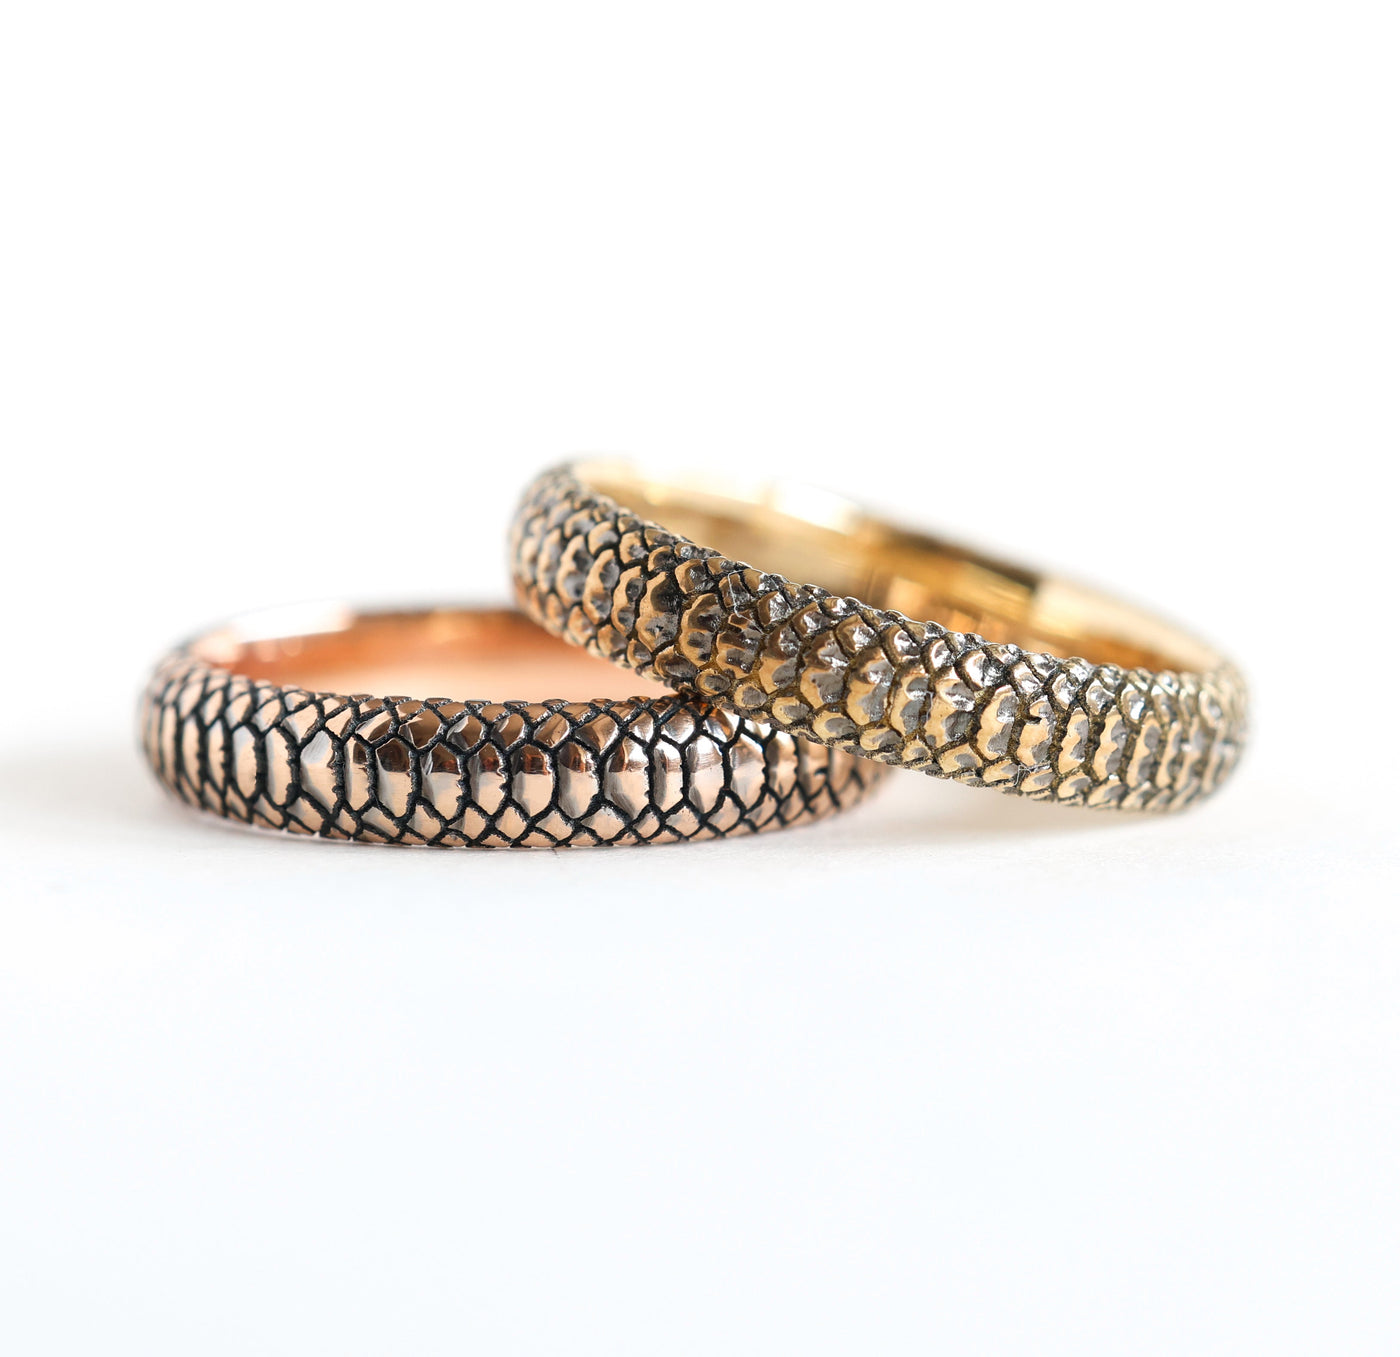 Gold snake band textured ring